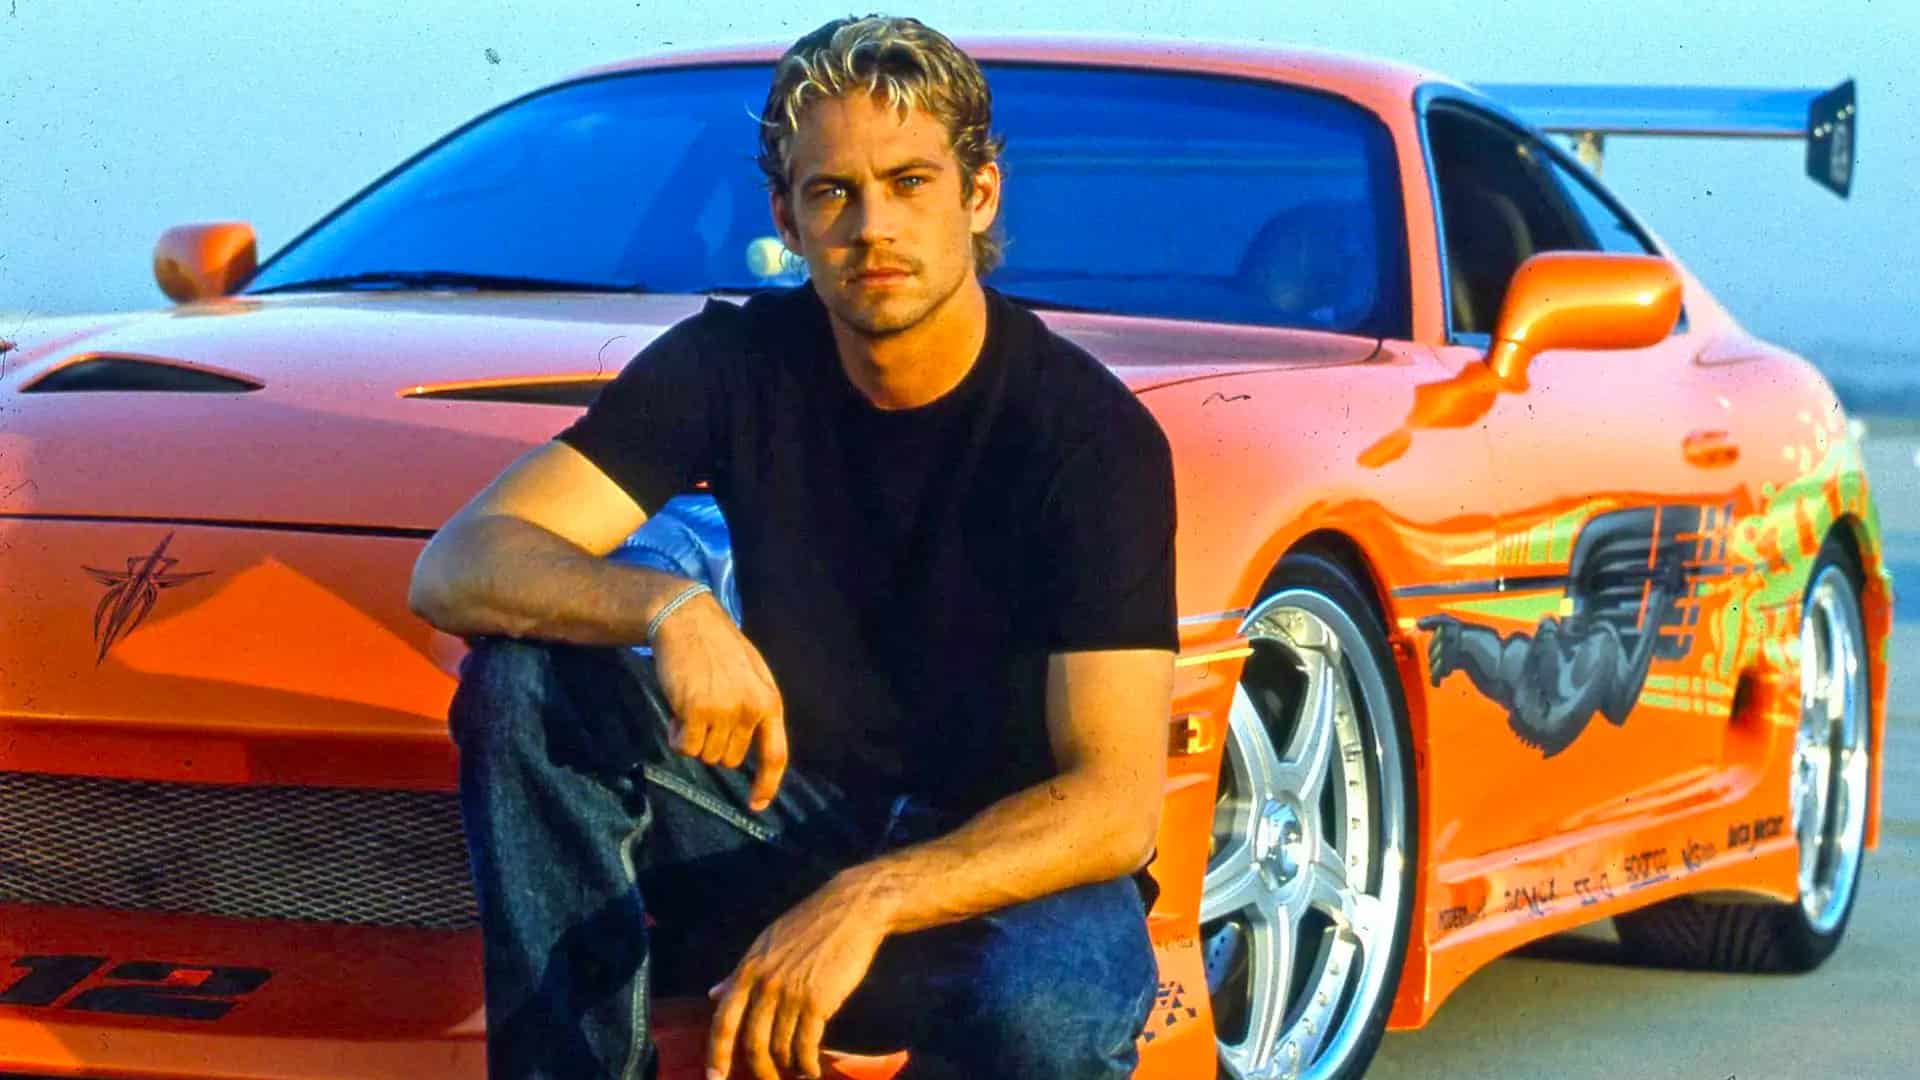 The Top 15 Best Cars in the Fast and the Furious Saga